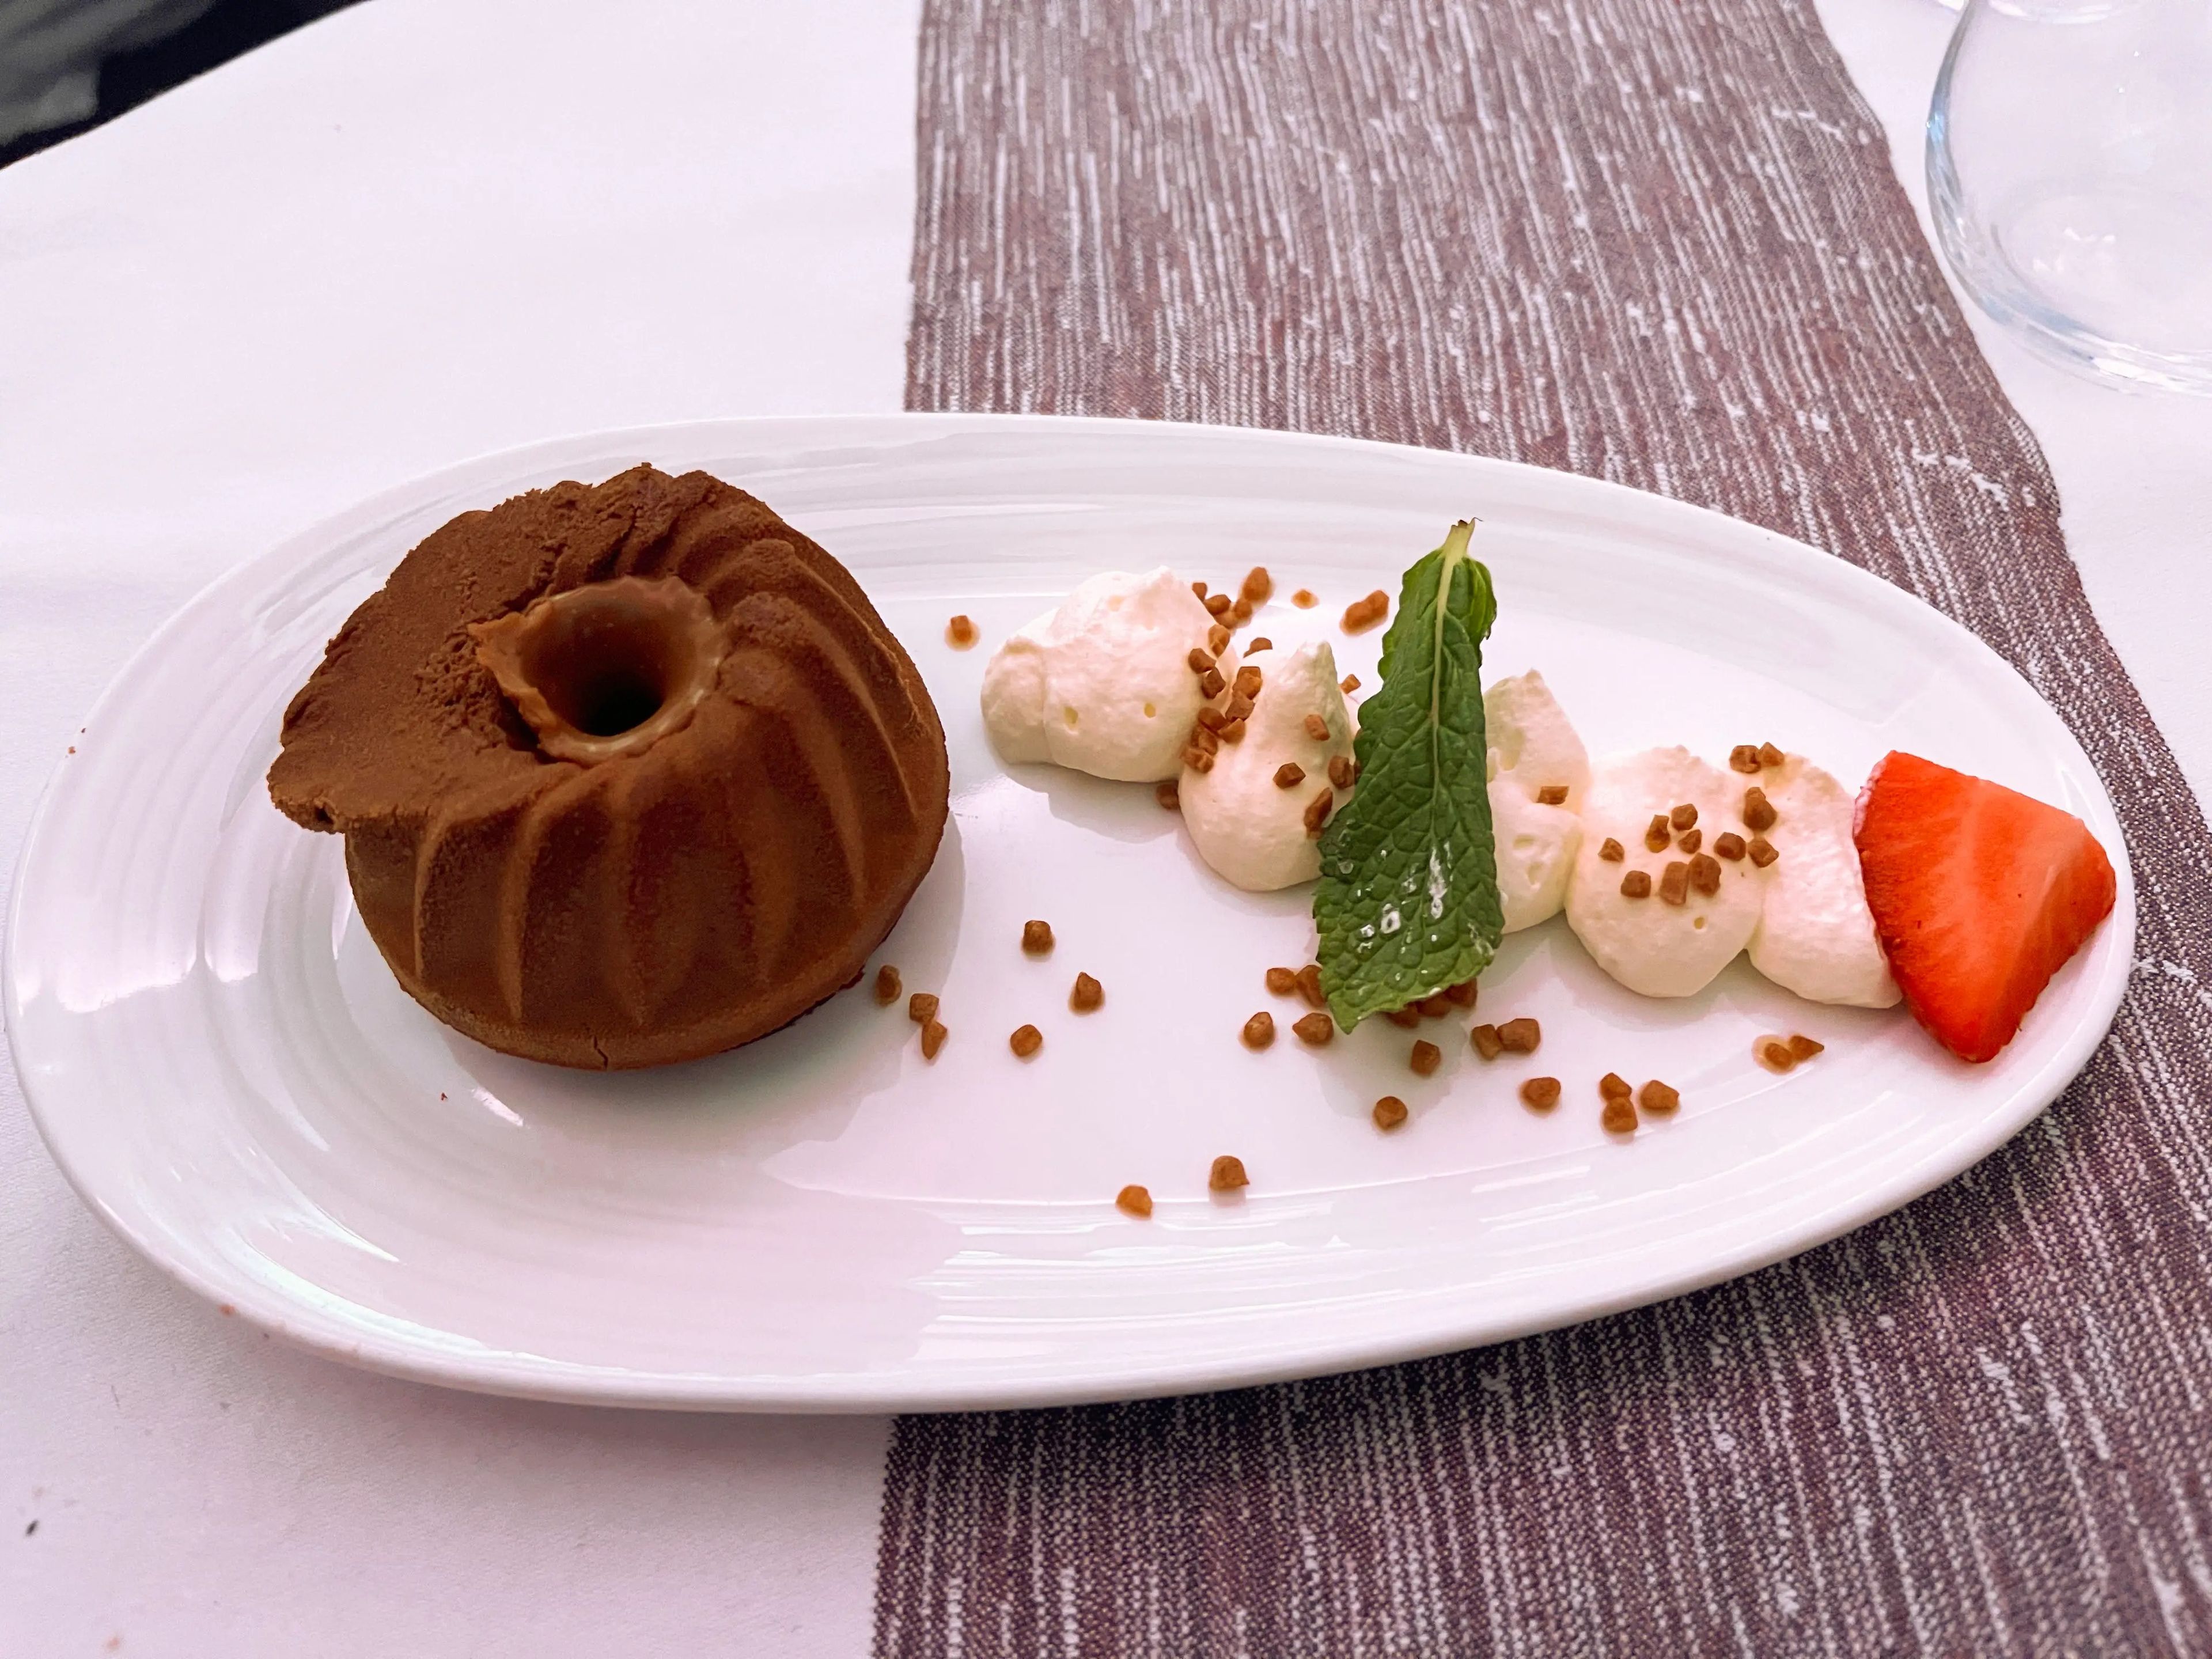 Chocolate-and-salted-caramel mousse with a wedge of strawberry and a mint leaf. The chocolate mouse is in the shape of a bundt and mouse is dotted along the opposite side of the plate